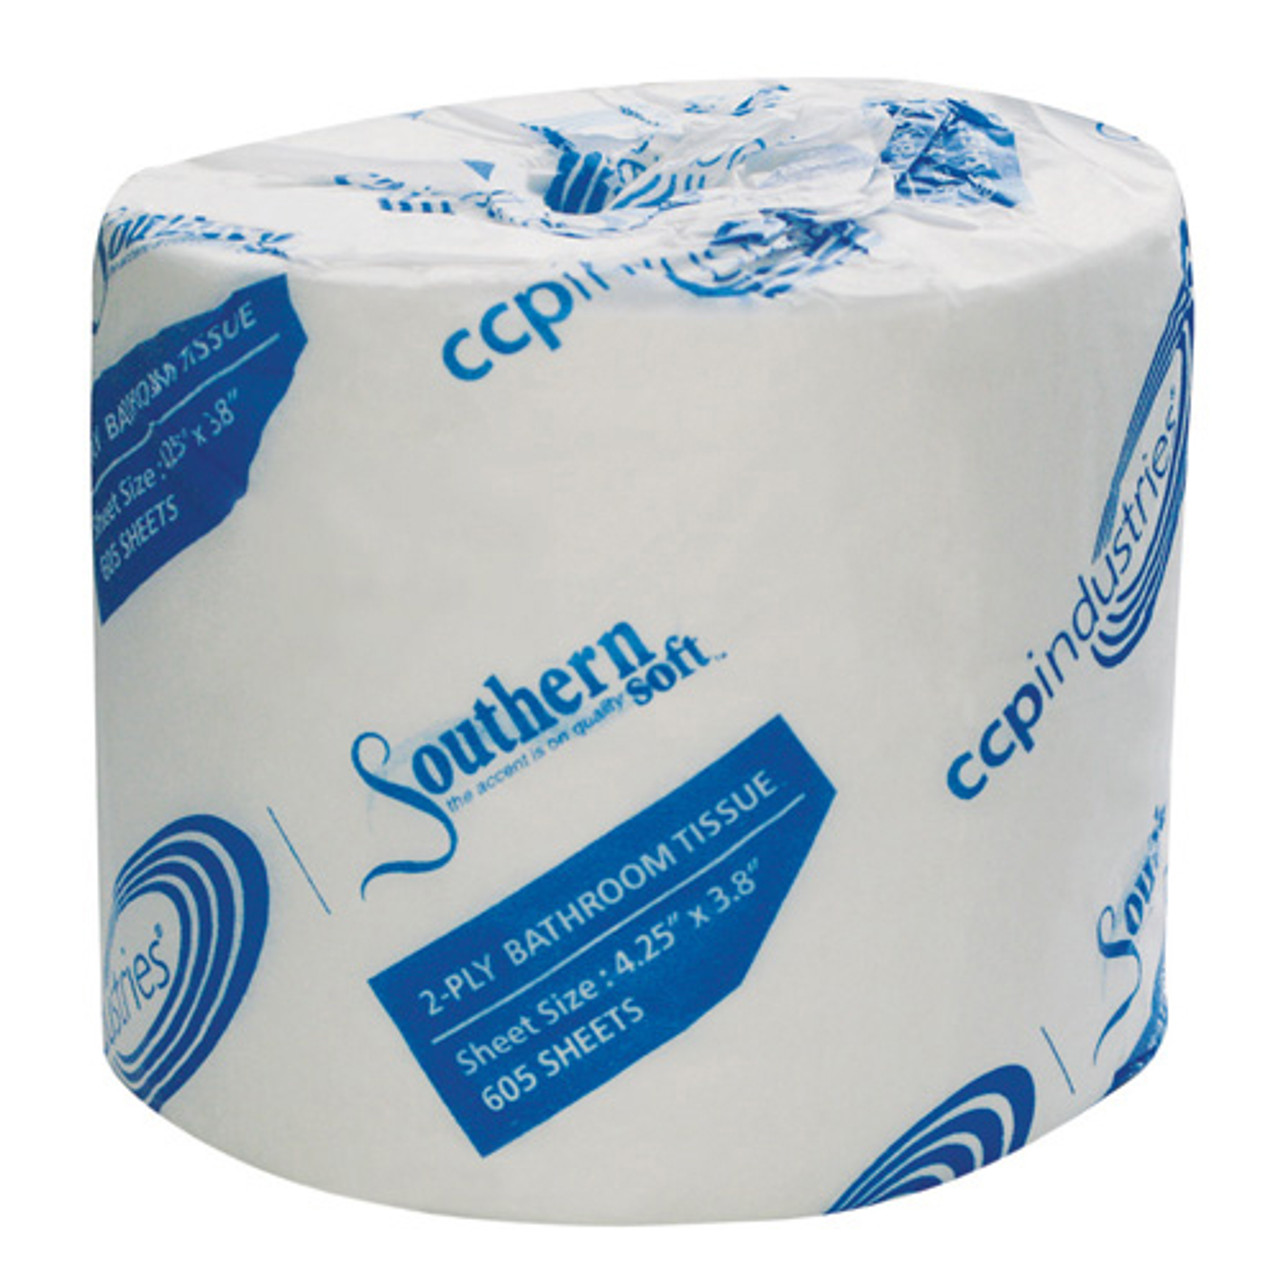 Bathroom Paper Products: Toilet Paper